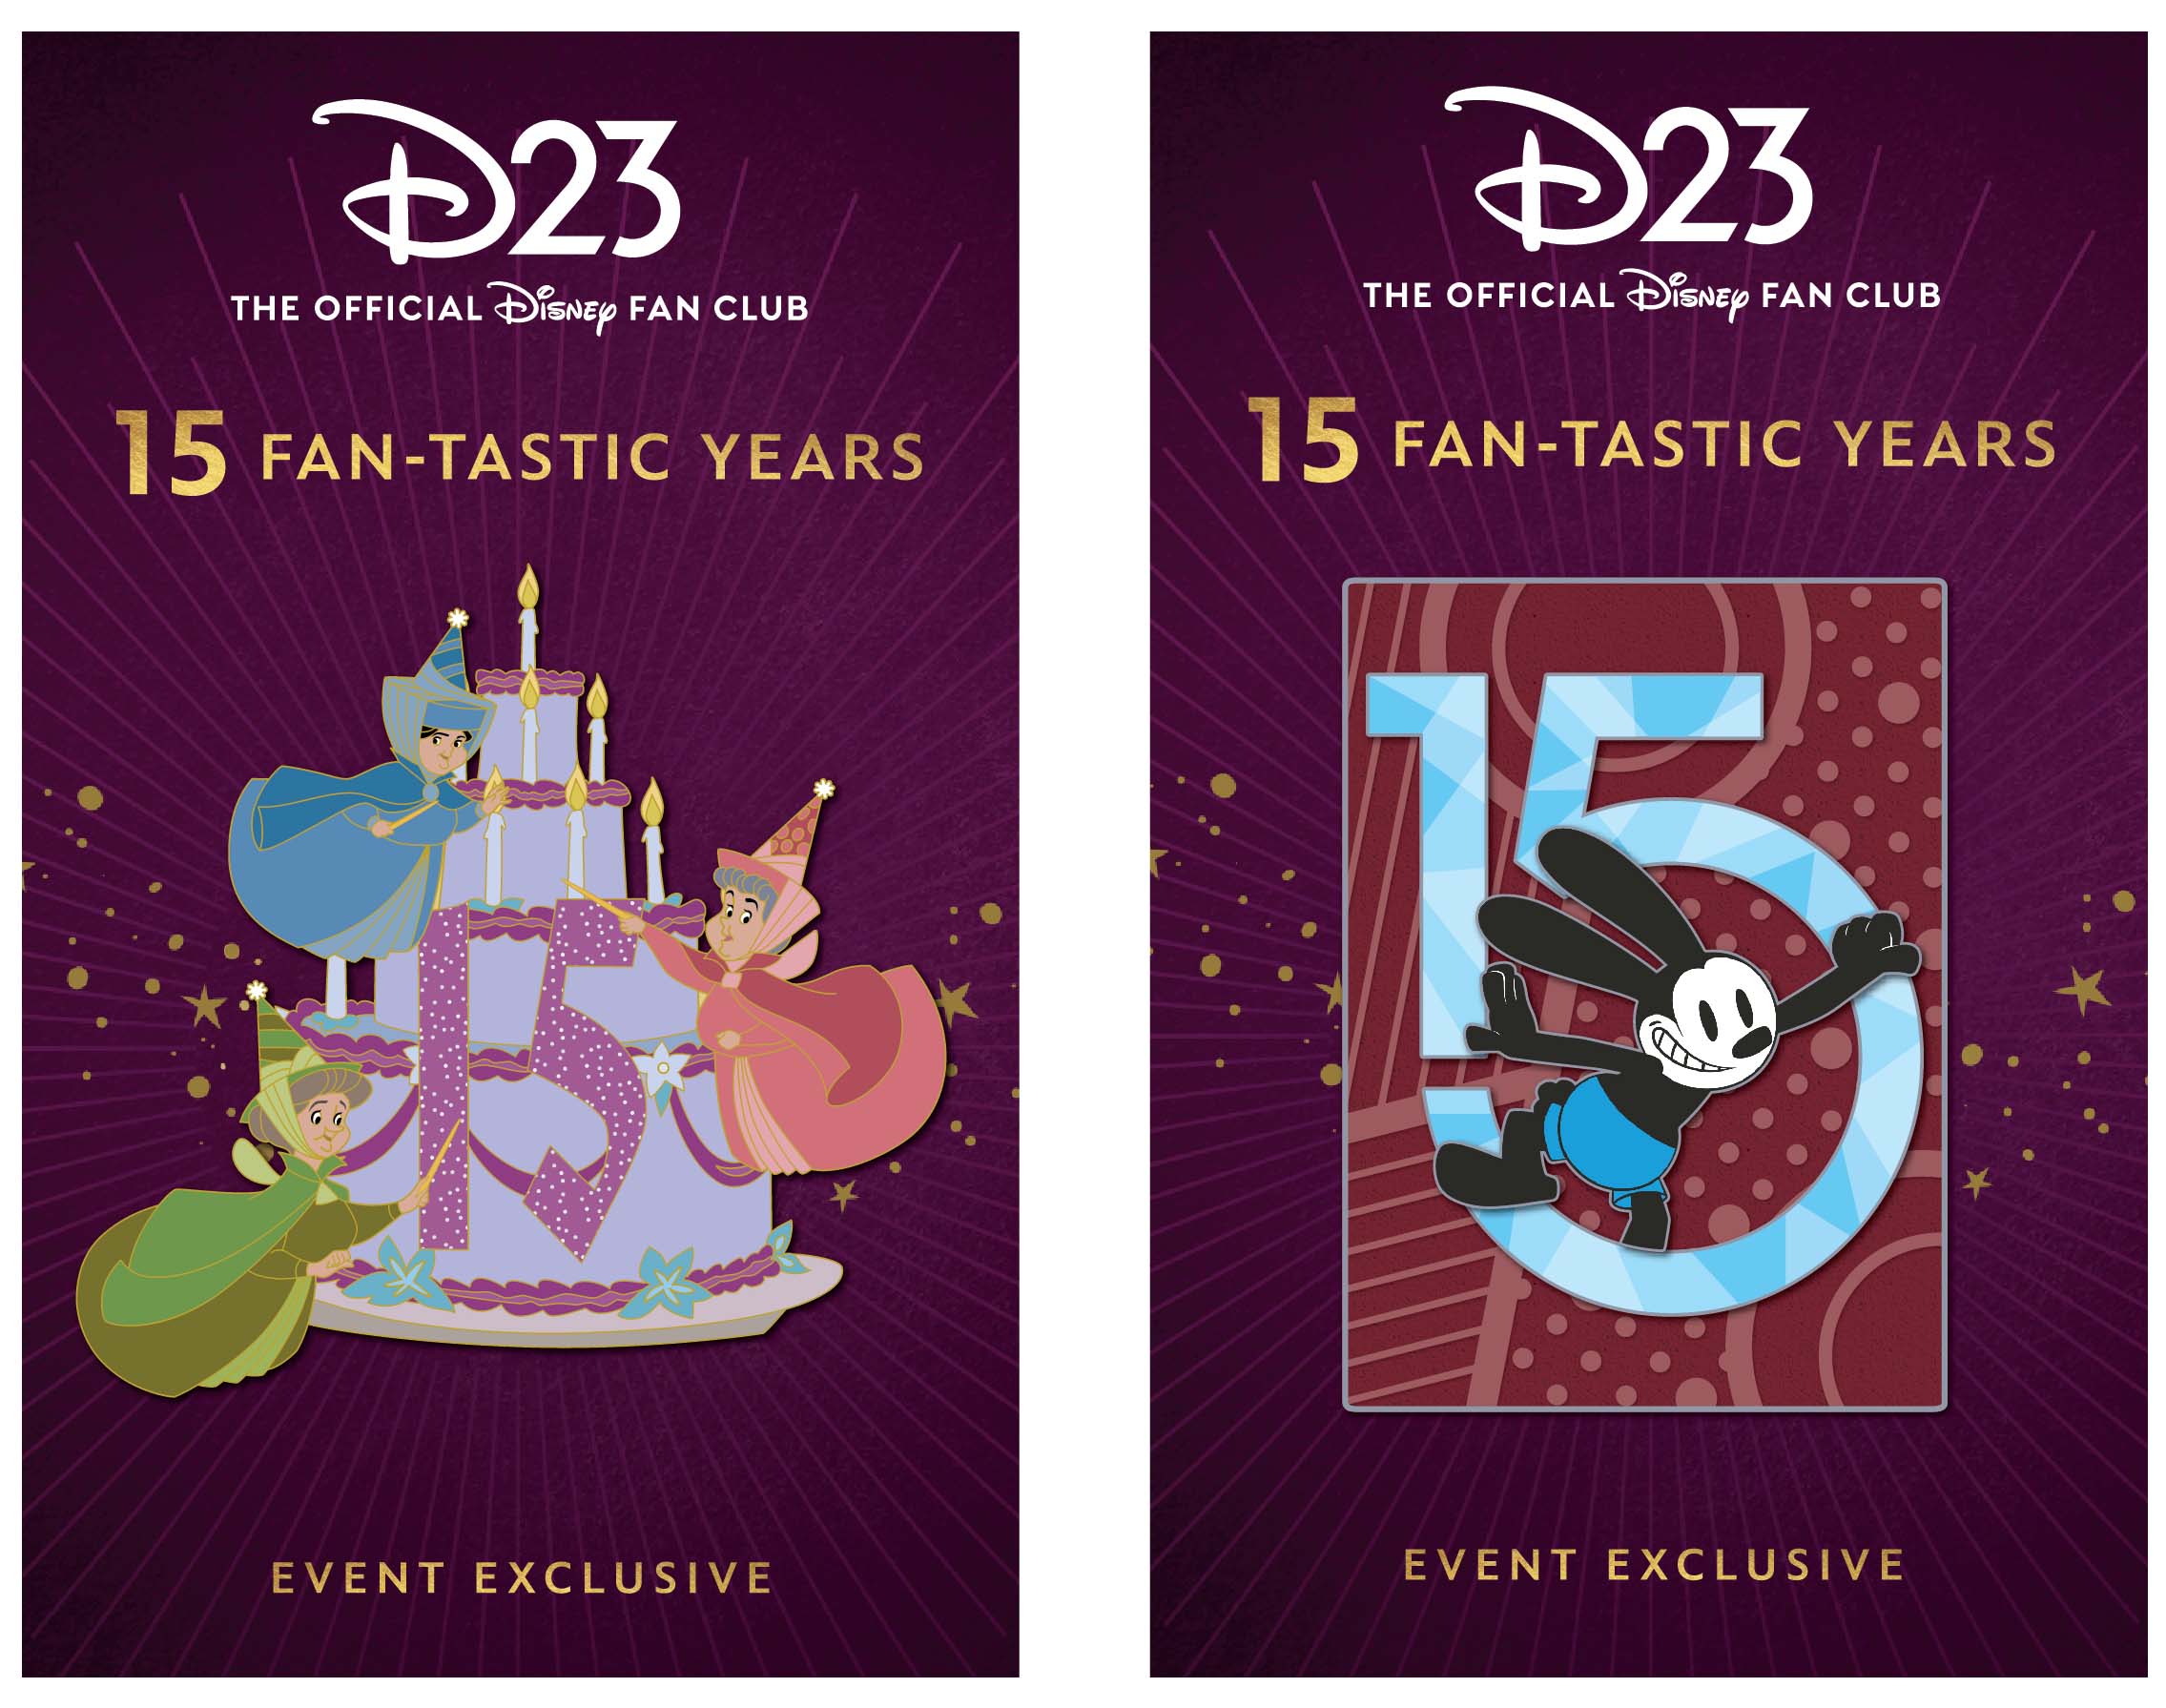 Triptych image featuring two exclusive pins that will be available at D23 15th Anniversary Celebration’s RSP opportunity. The first pin features artwork inspired by Sleeping Beauty, with a pink and blue cake decorated by Flora, Fauna, and Merryweather, bearing “15” for 15 Fan-tastic Years of D23. The other pin features artwork of Oswald the Lucky Rabbit as he “steps out” of a large “15” against a colorful background.